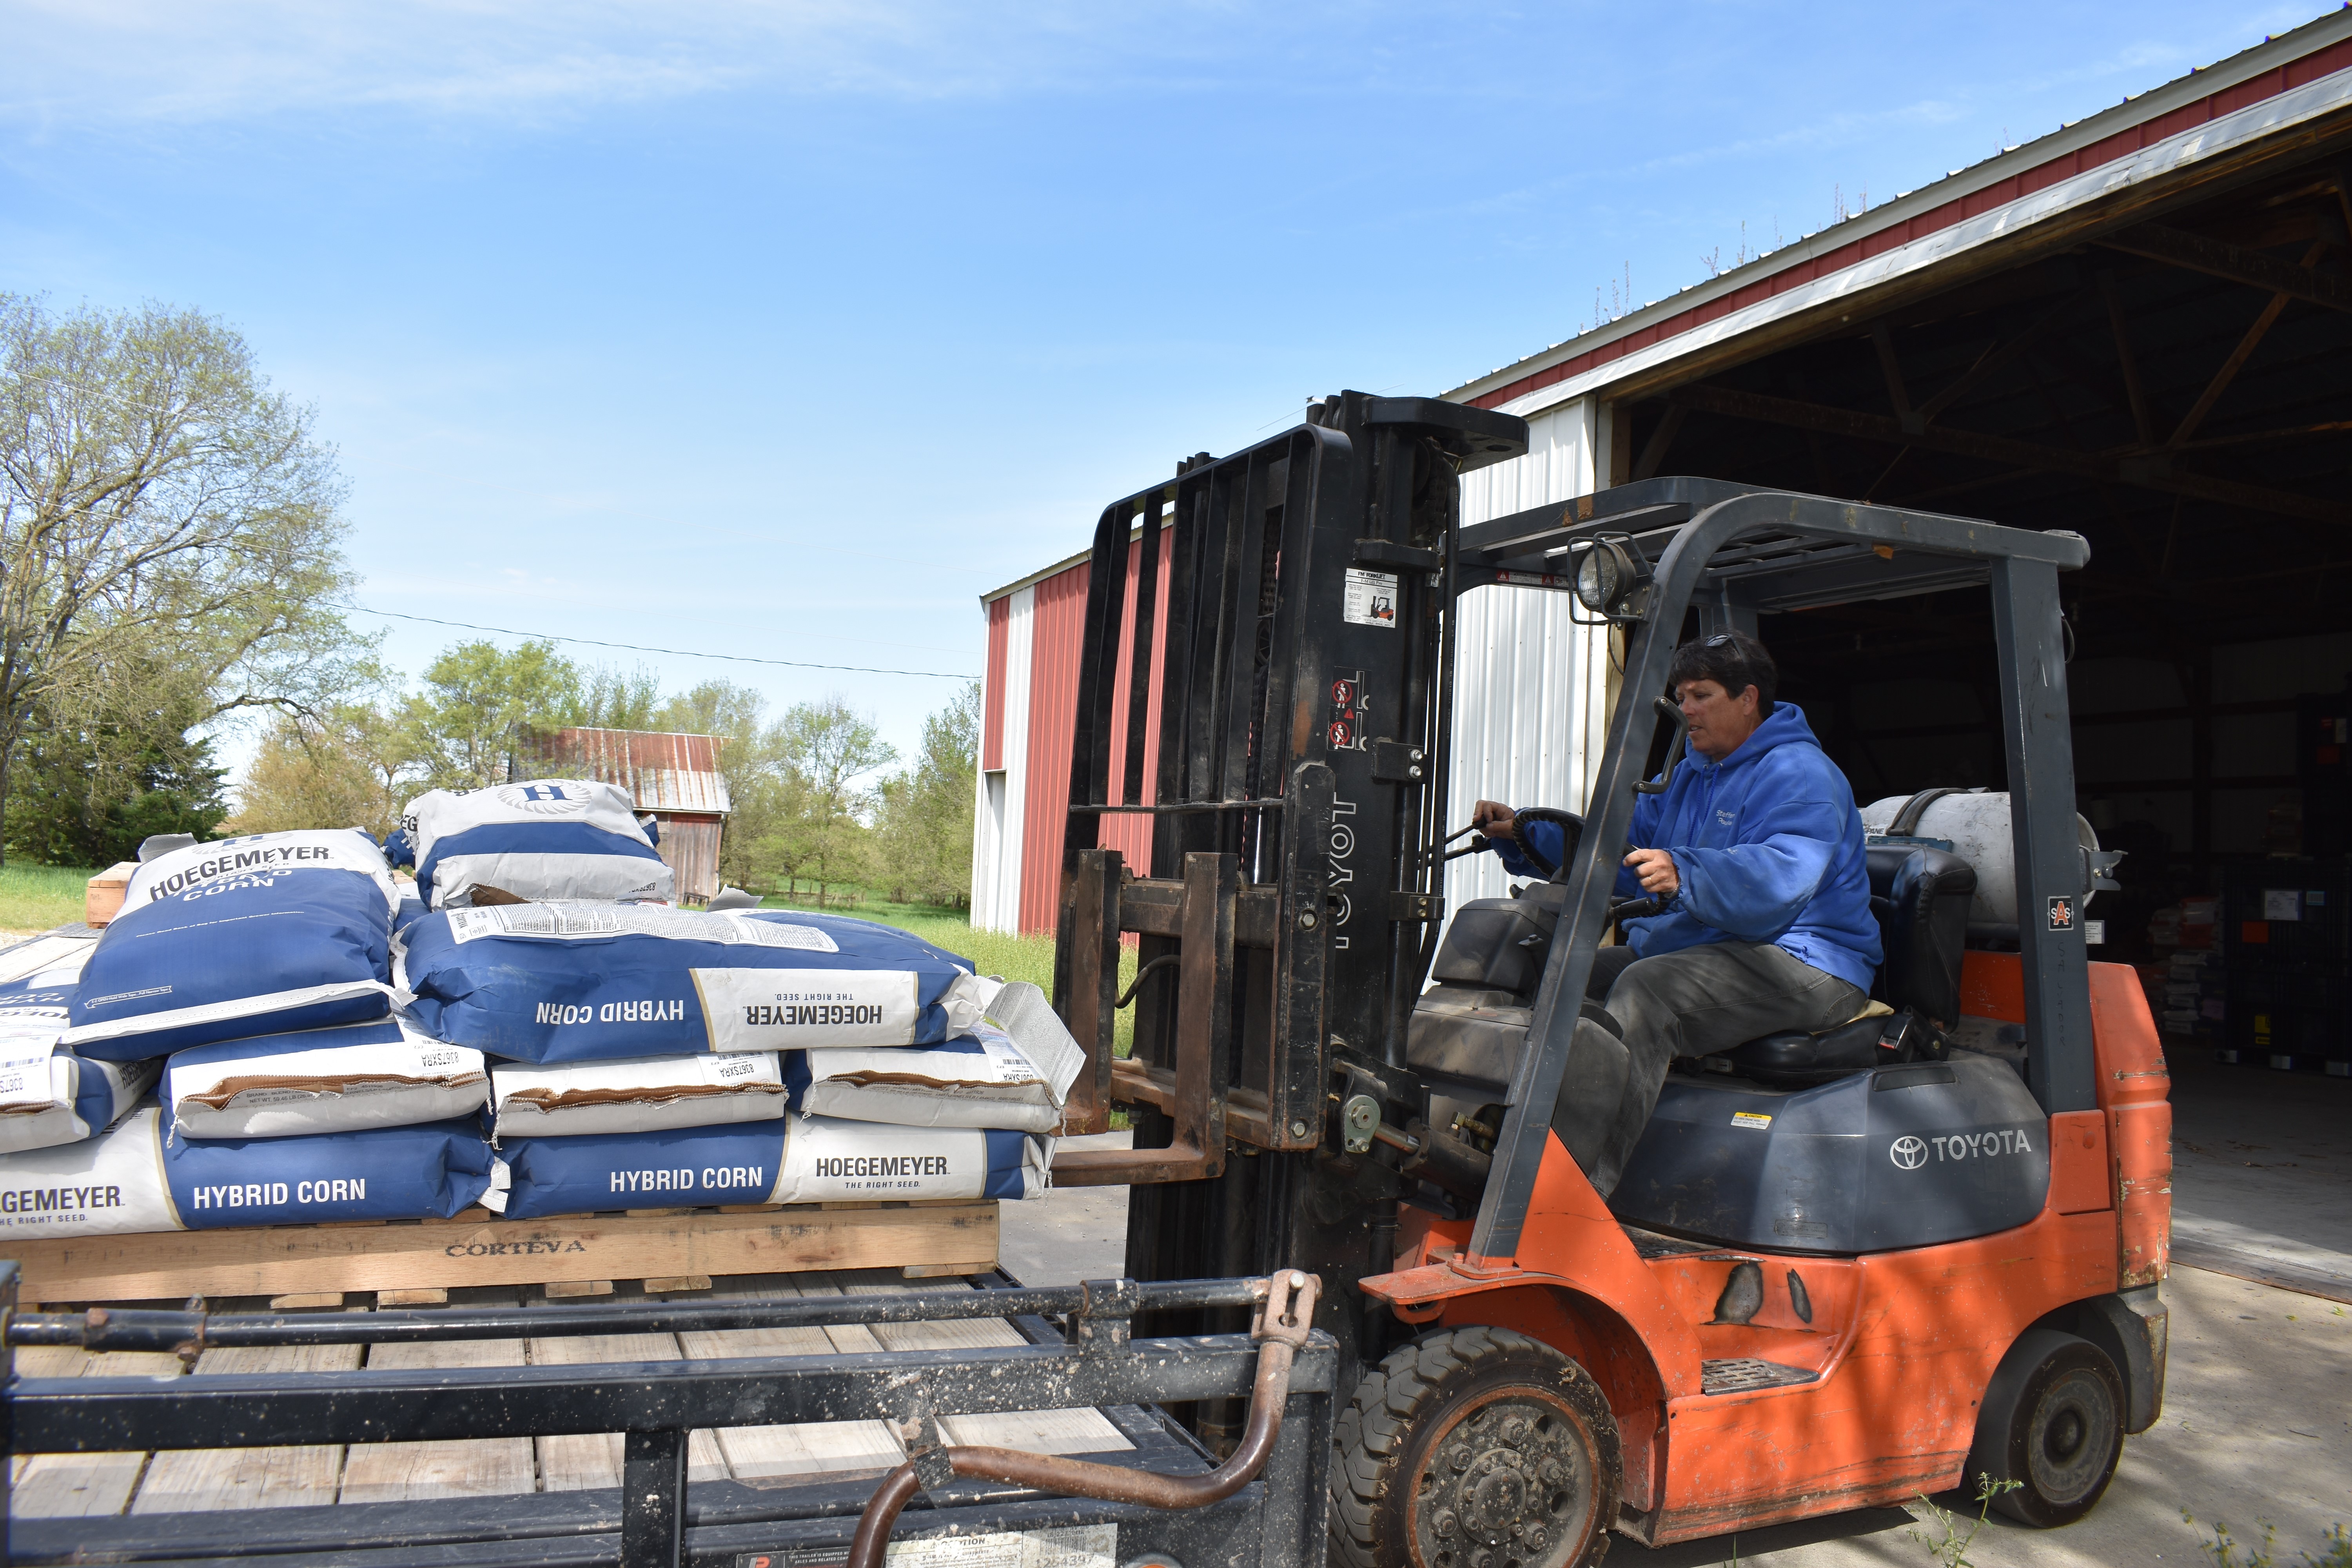 Paula Sue Steffen is driving a fork lift which is lifting multiple bags of soil